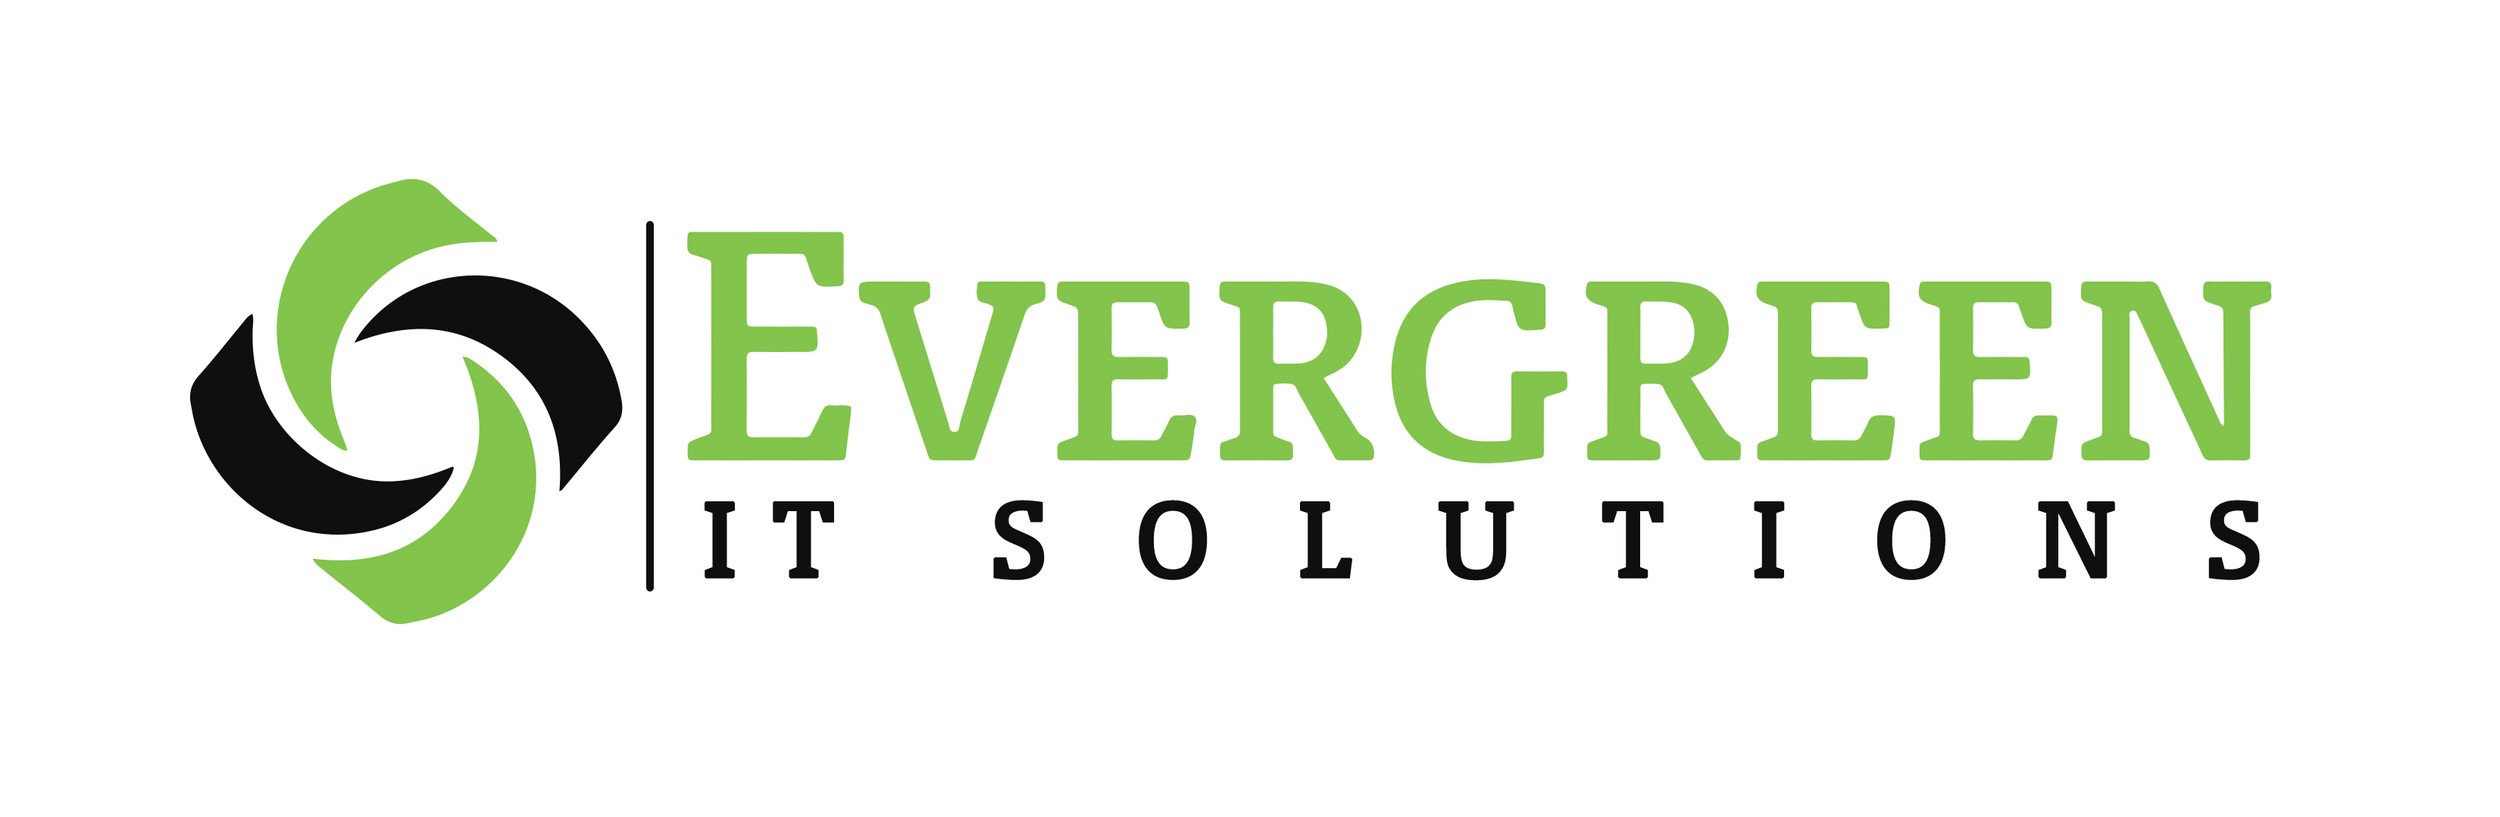 Evergreen IT Solutions